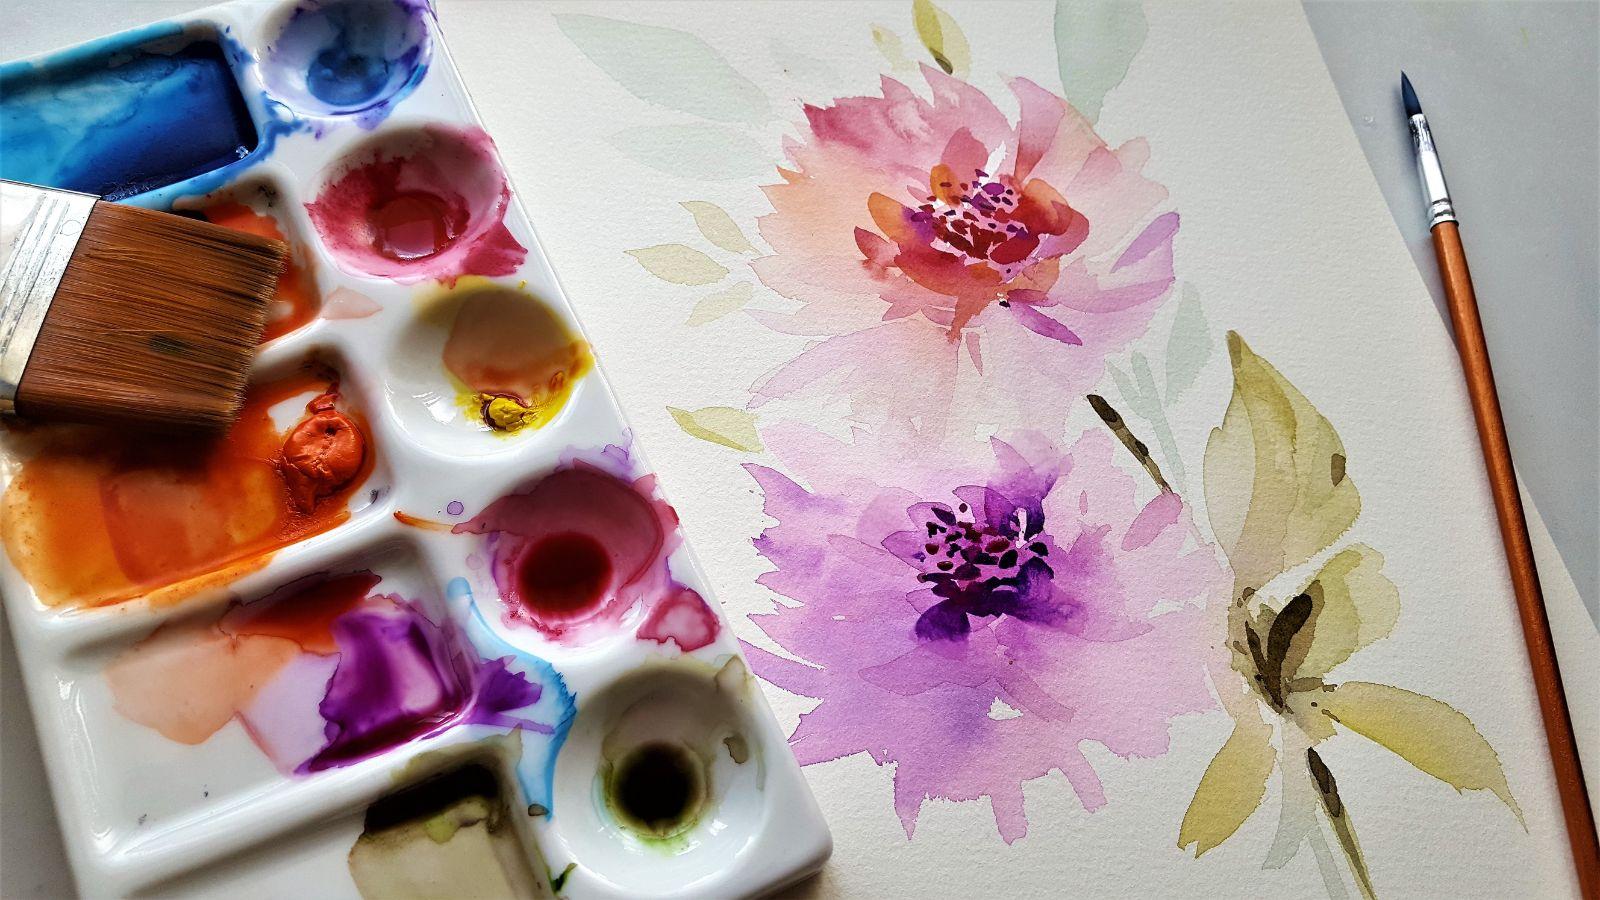 image of art supplies and watercolour painted flowers<br />
